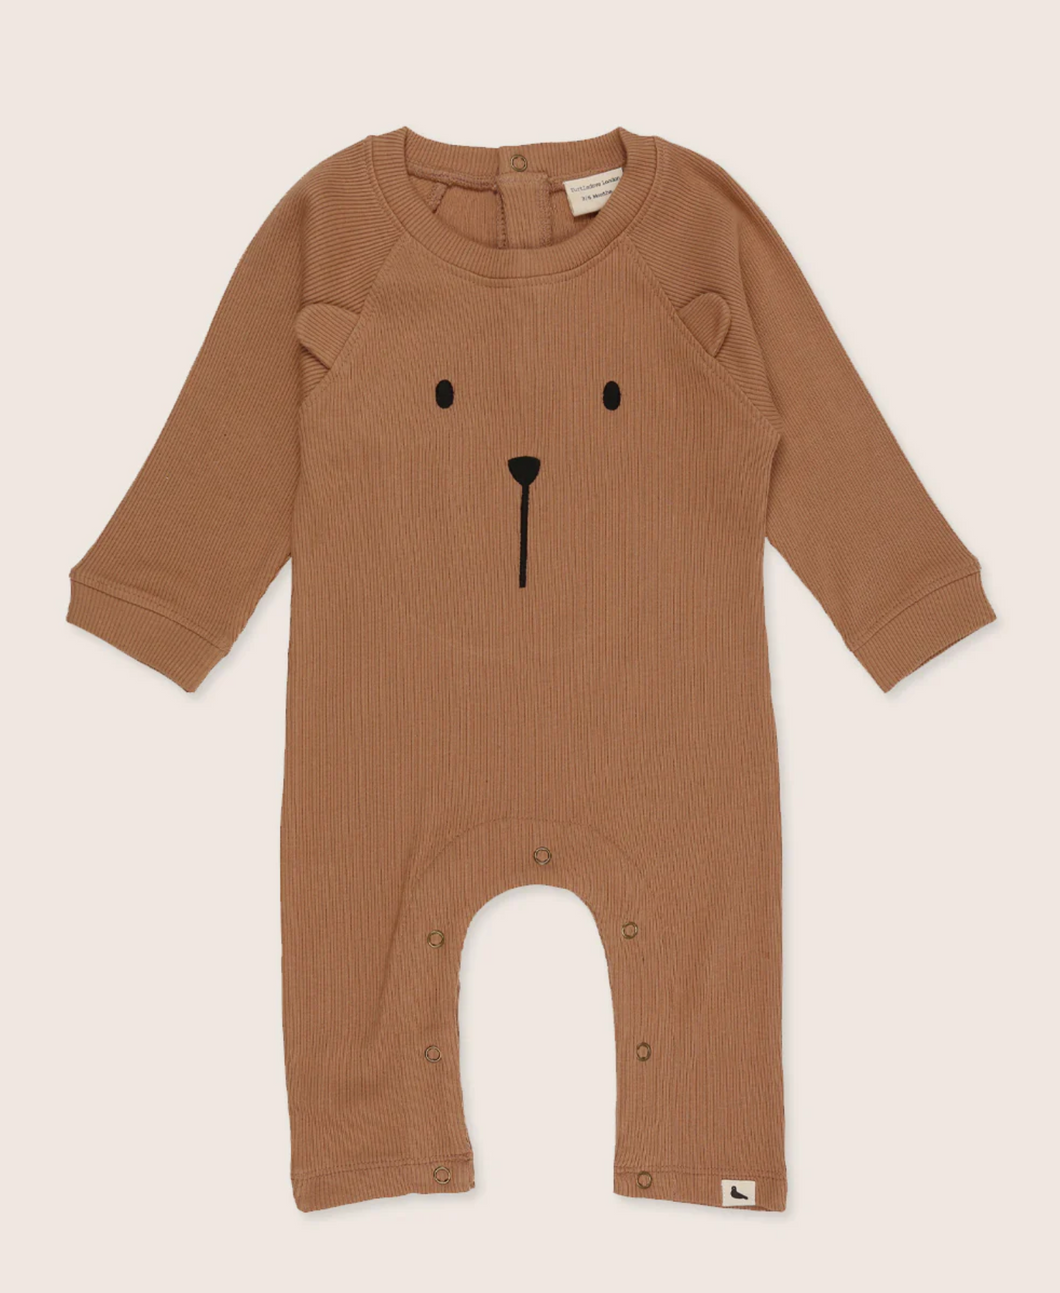 Bear Character Clay Playsuit